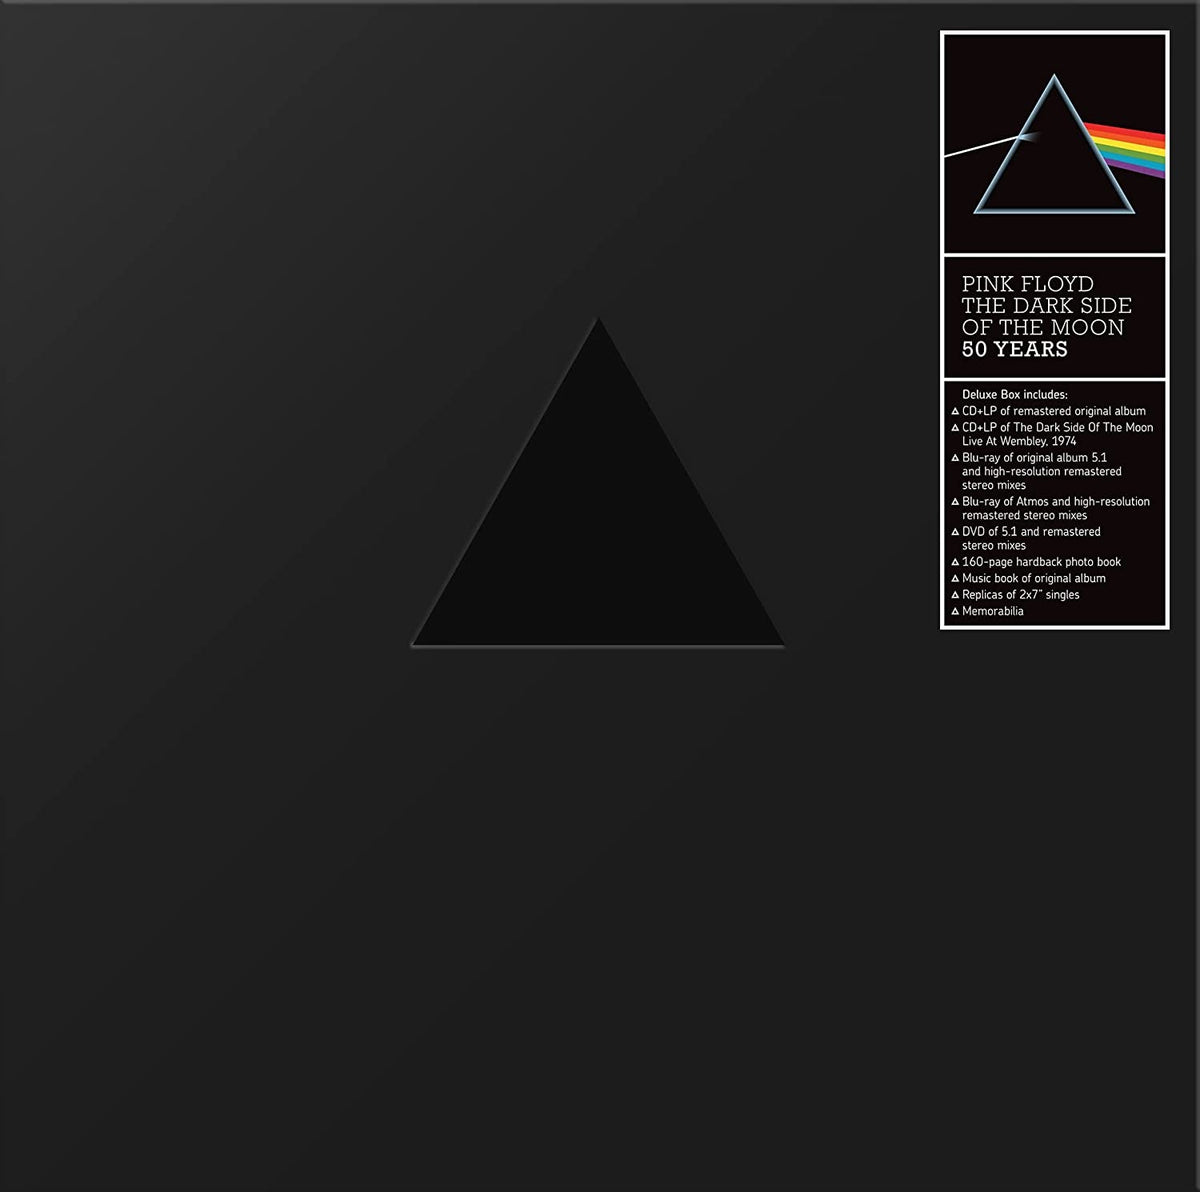 Pink Floyd - The Dark Side Of The Moon Box Set (50th Anniversary Remaster w/ 2LPs, 2CDs, DVD, Blu-Ray, Hardcover Book)